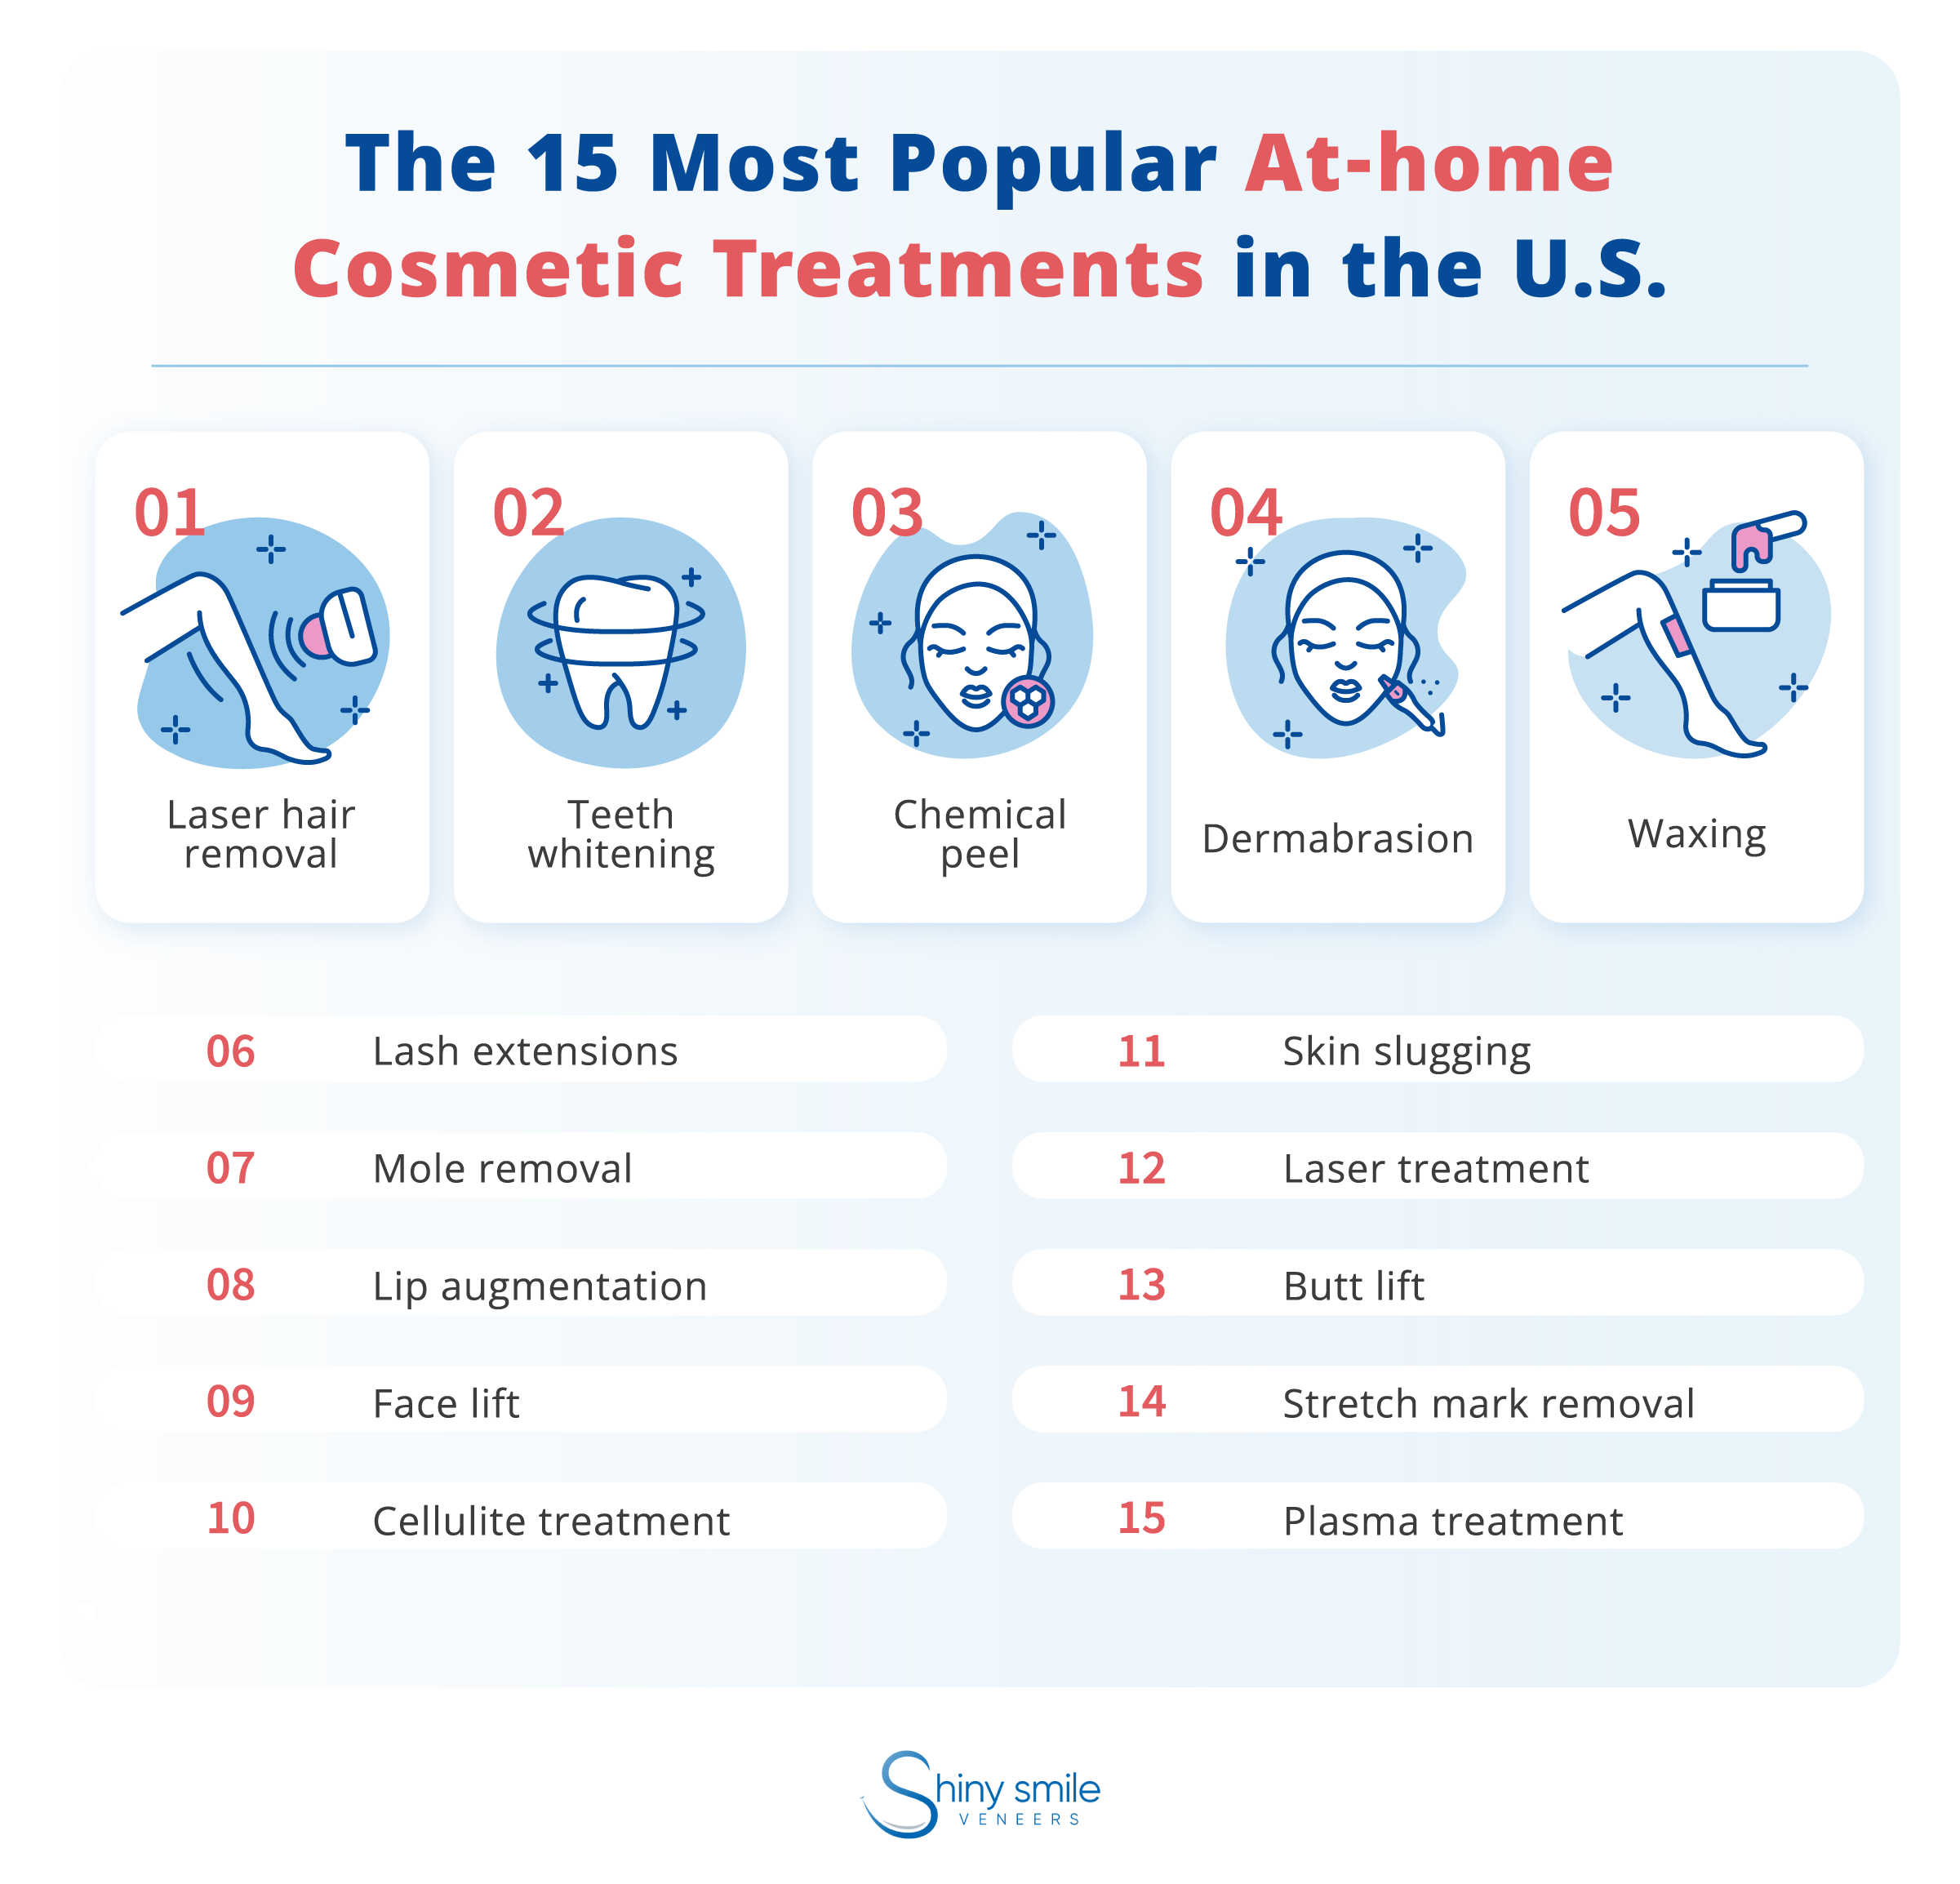 the most popular at-home cosmetic treatments in the U.S.